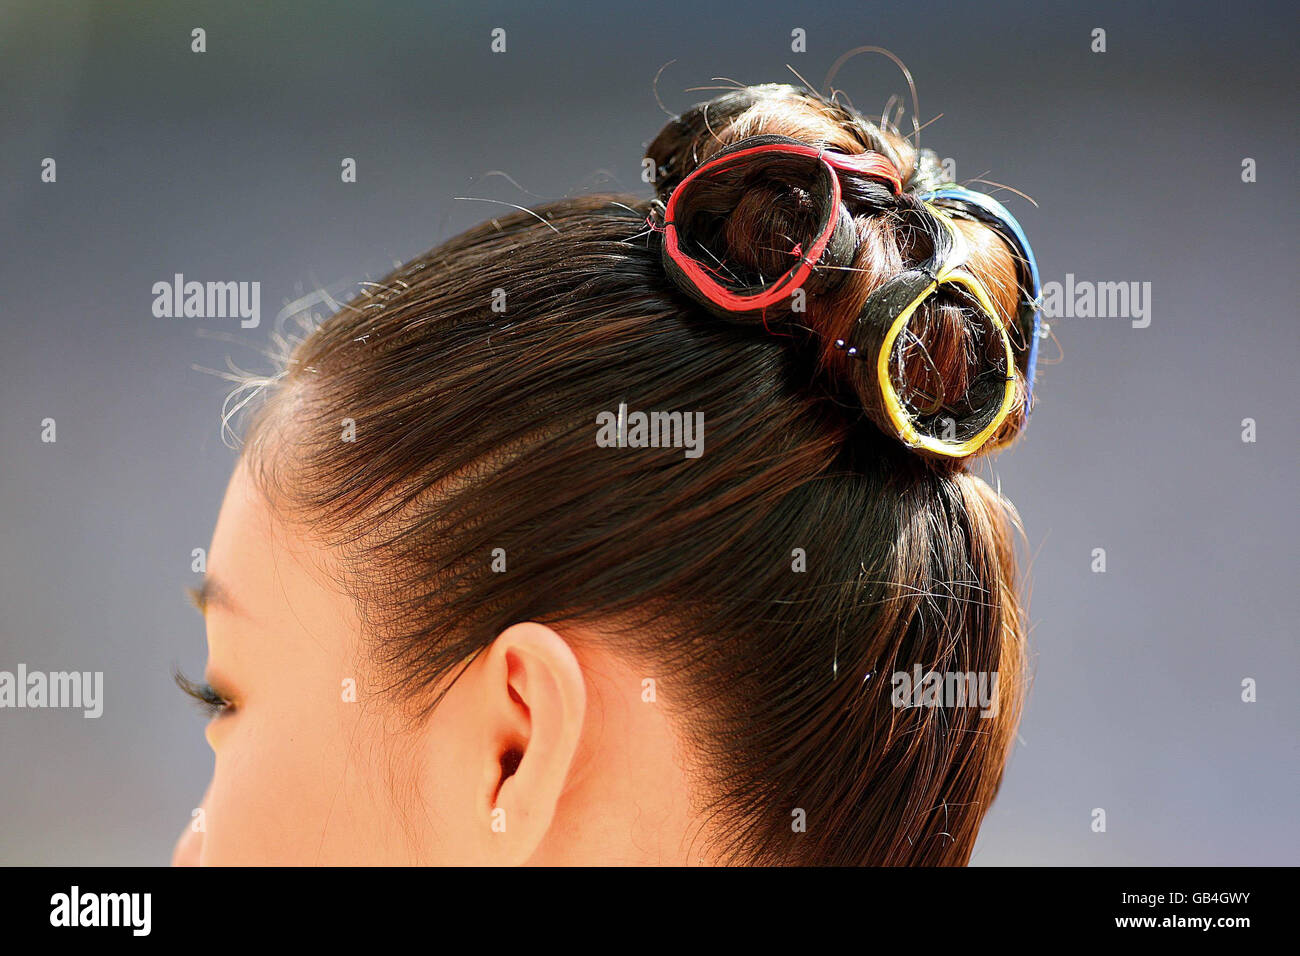 One of the medal presenters has her hair tied up in the colours of the Paralympic Games at the National Stadium during the Beijing Paralympic Games 2008, China. Stock Photo